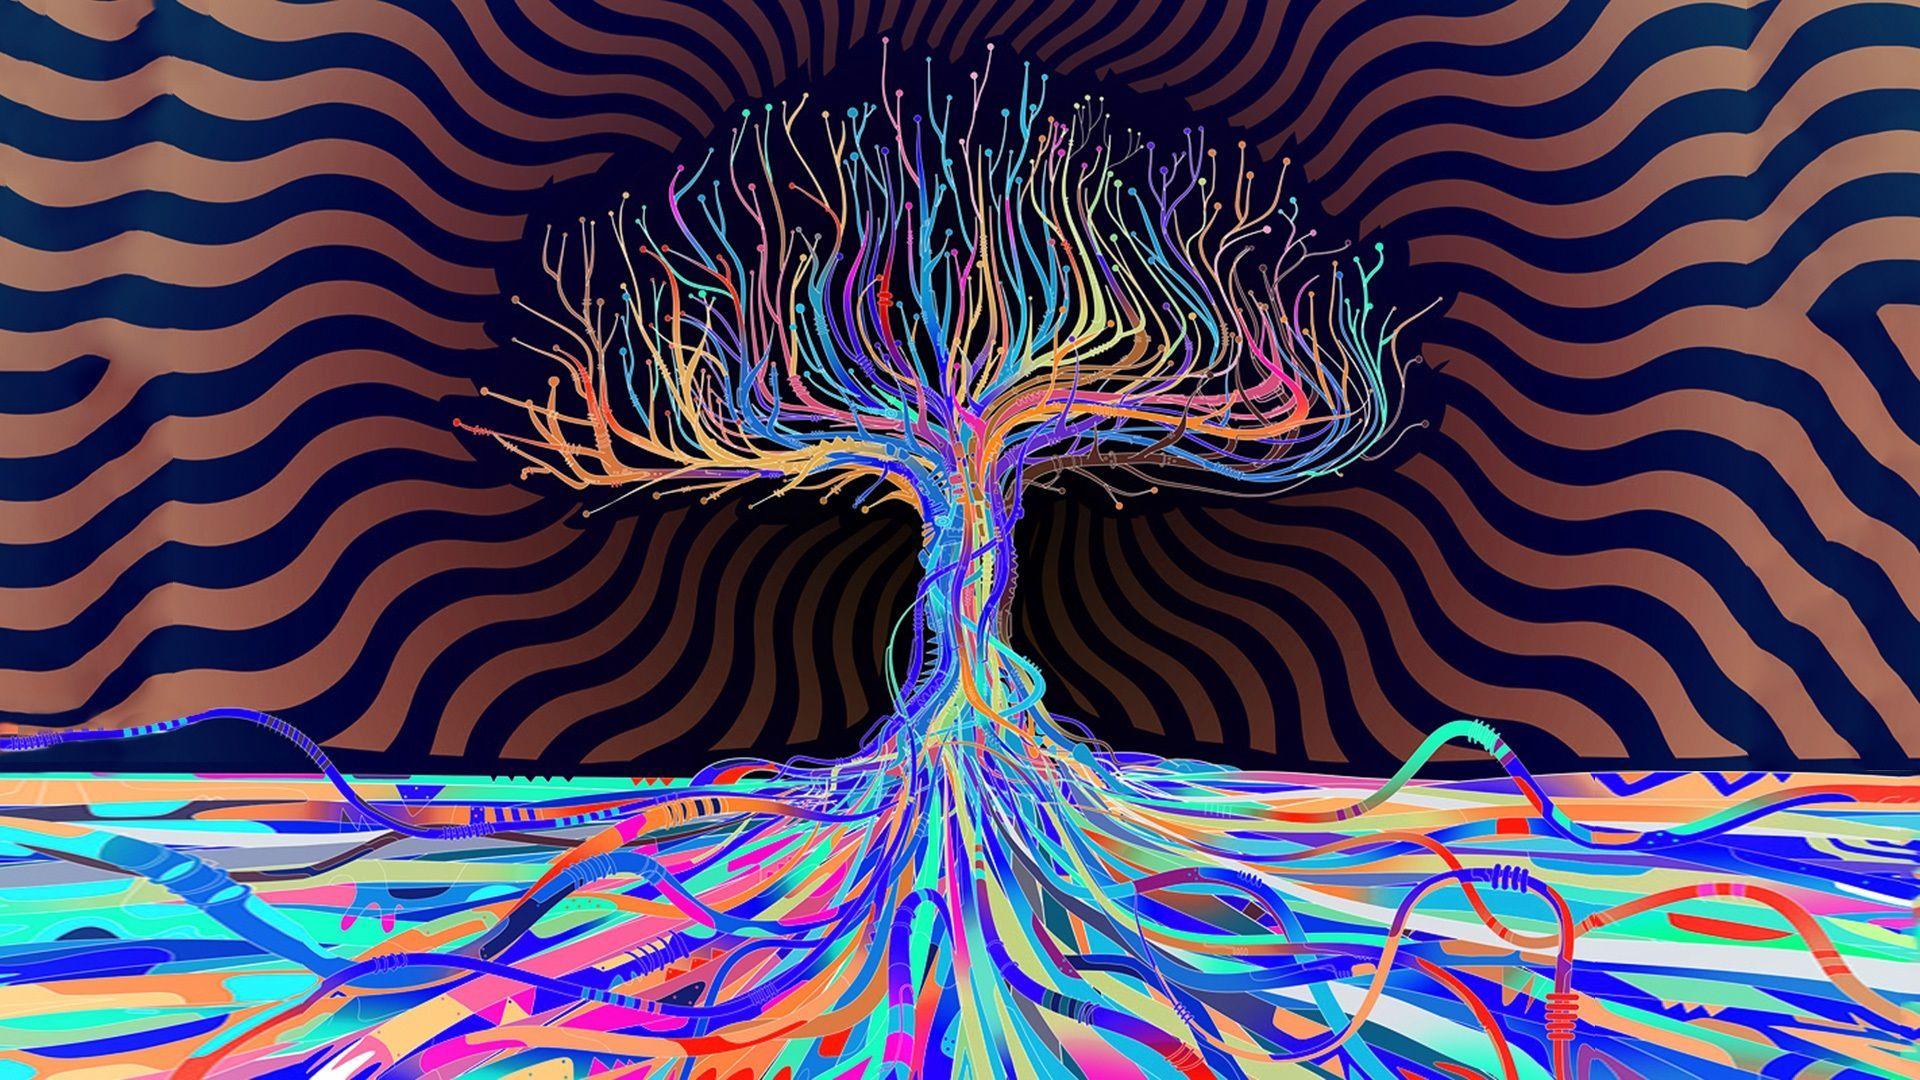 Psychedelic HD Wallpaper. Psychedelic colors, Trippy wallpaper